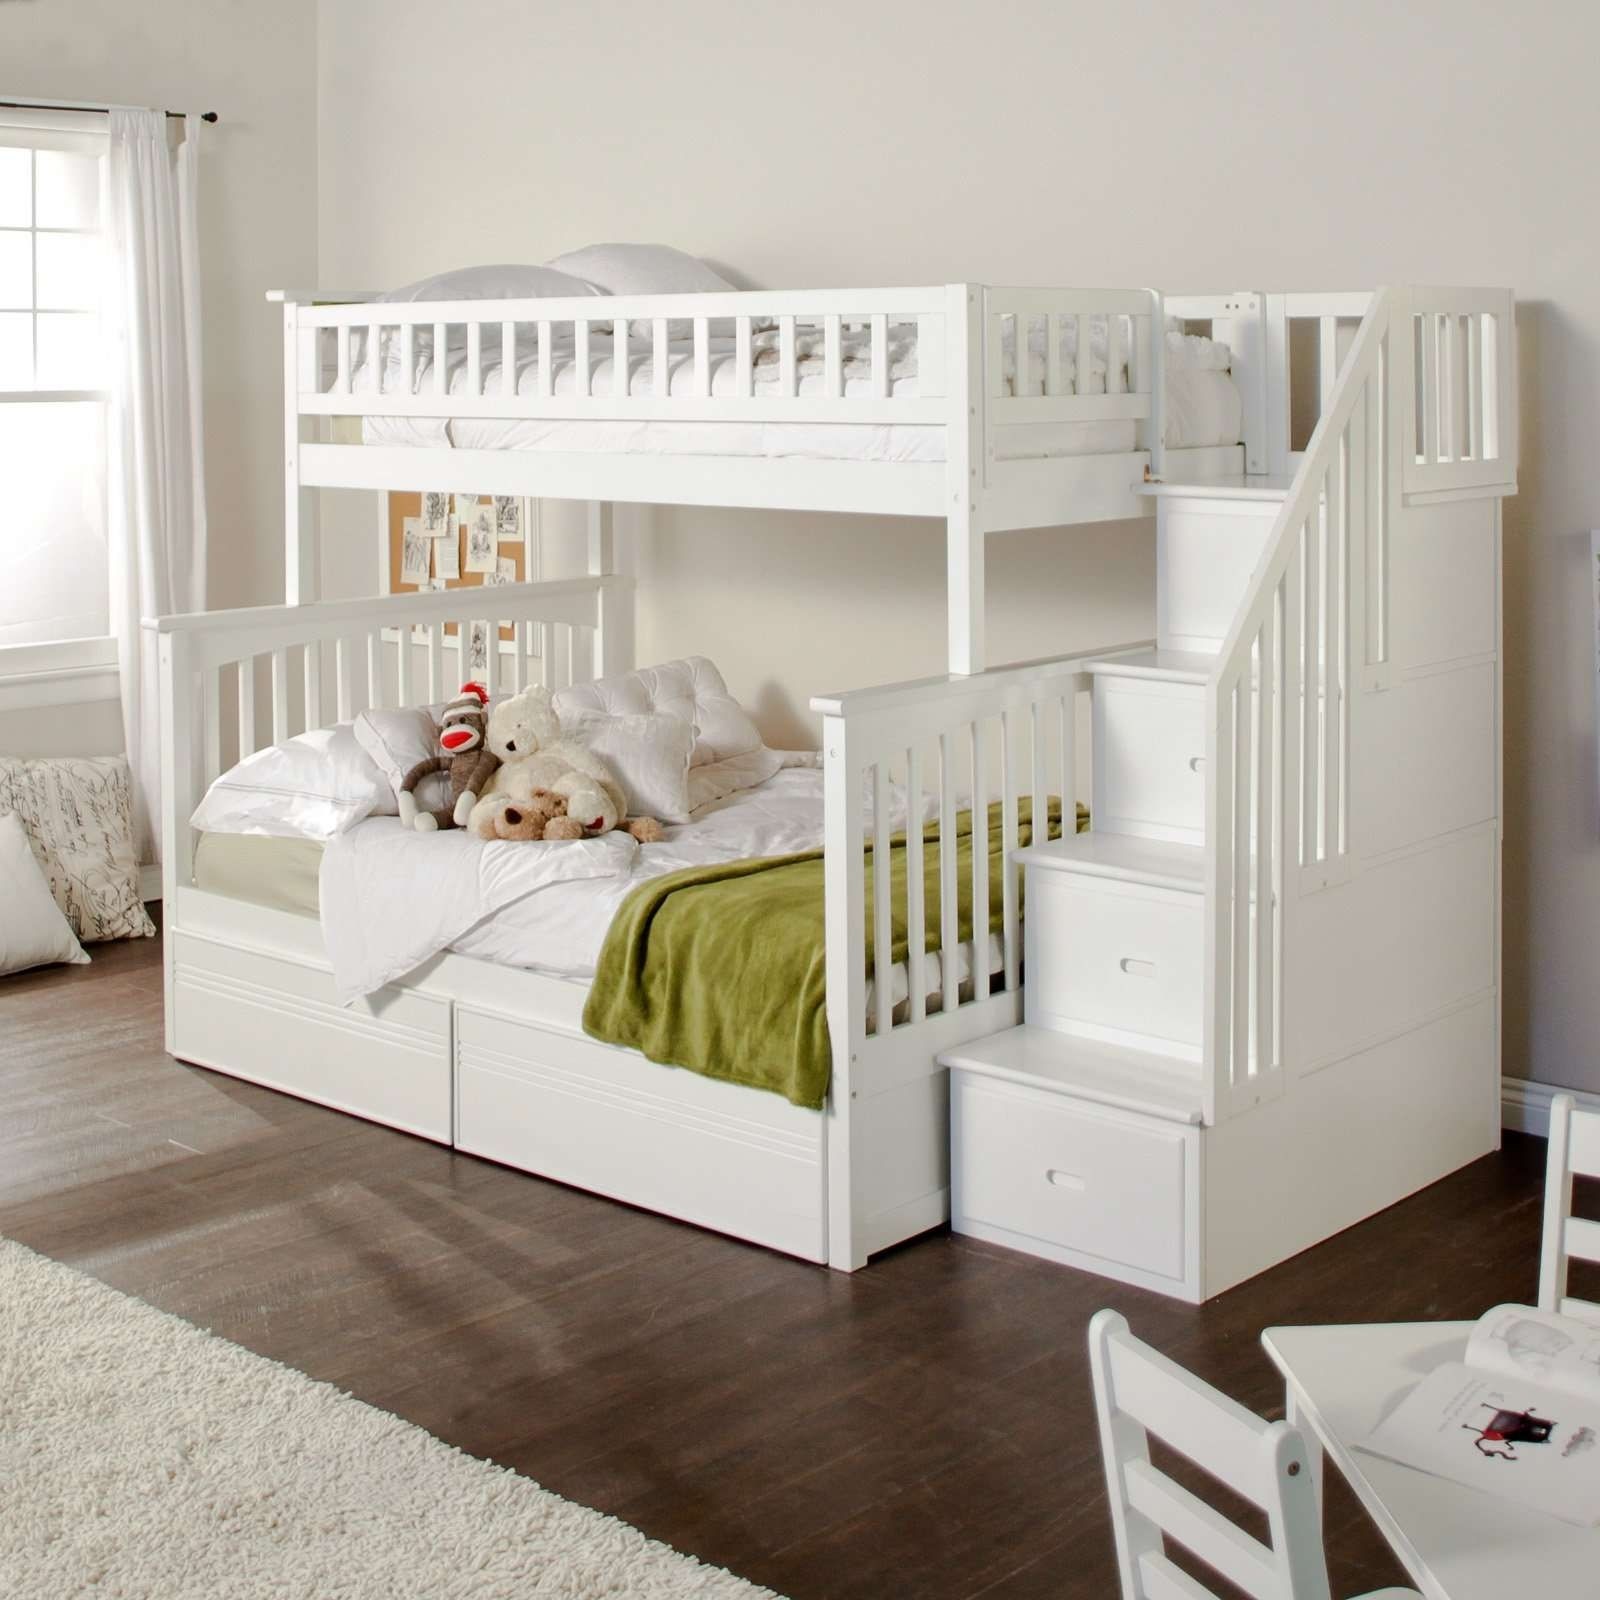 Double bed bunks